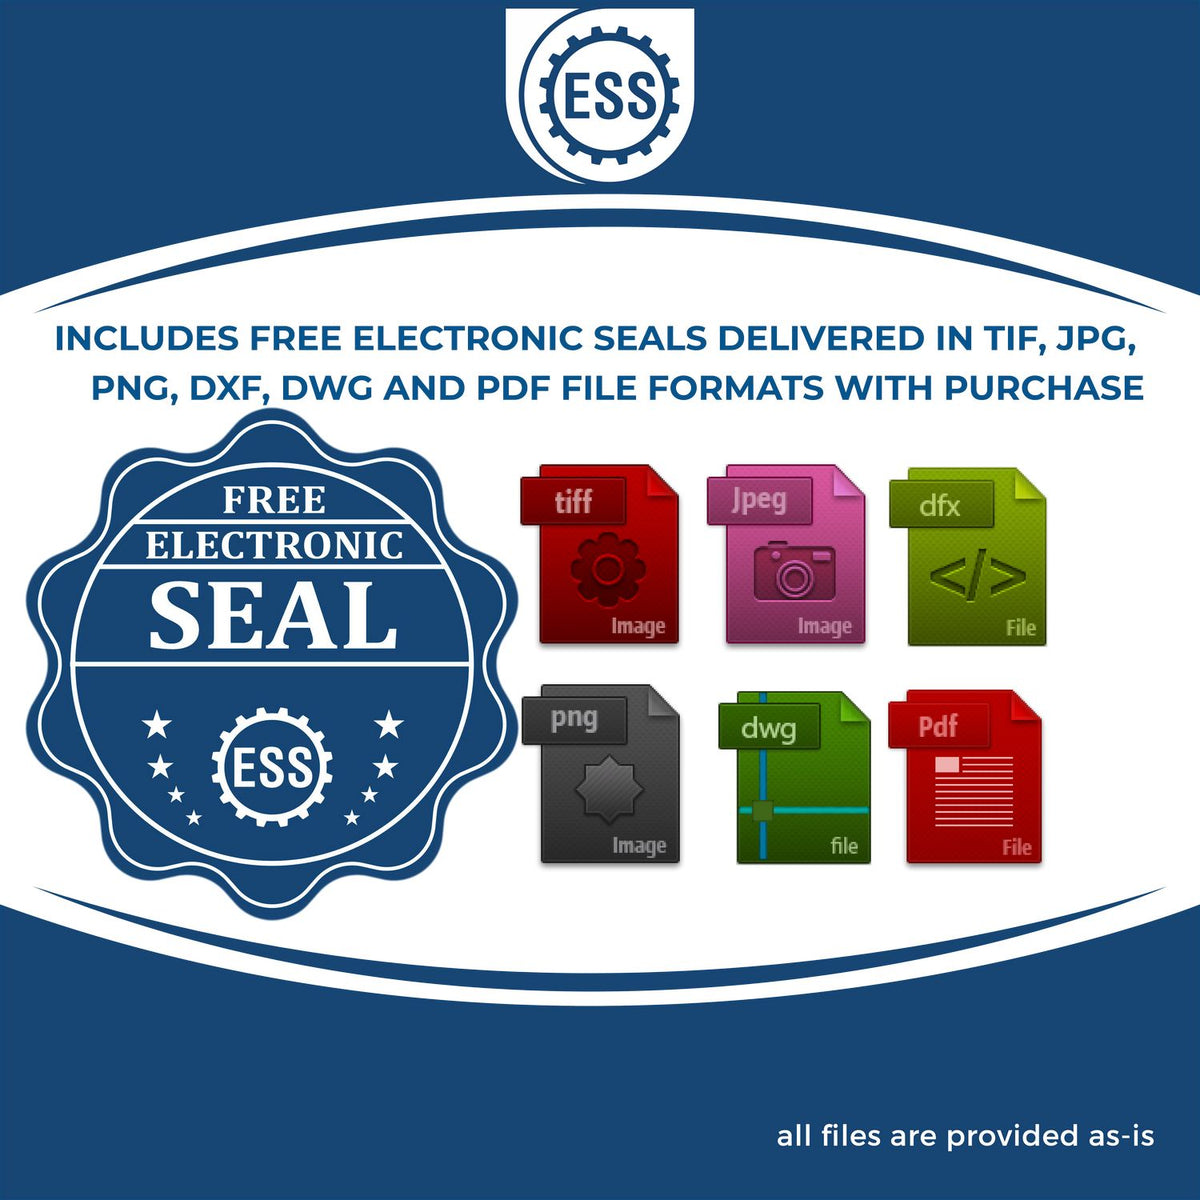 An infographic for the free electronic seal for the Hybrid New York Land Surveyor Seal illustrating the different file type icons such as DXF, DWG, TIF, JPG and PNG.